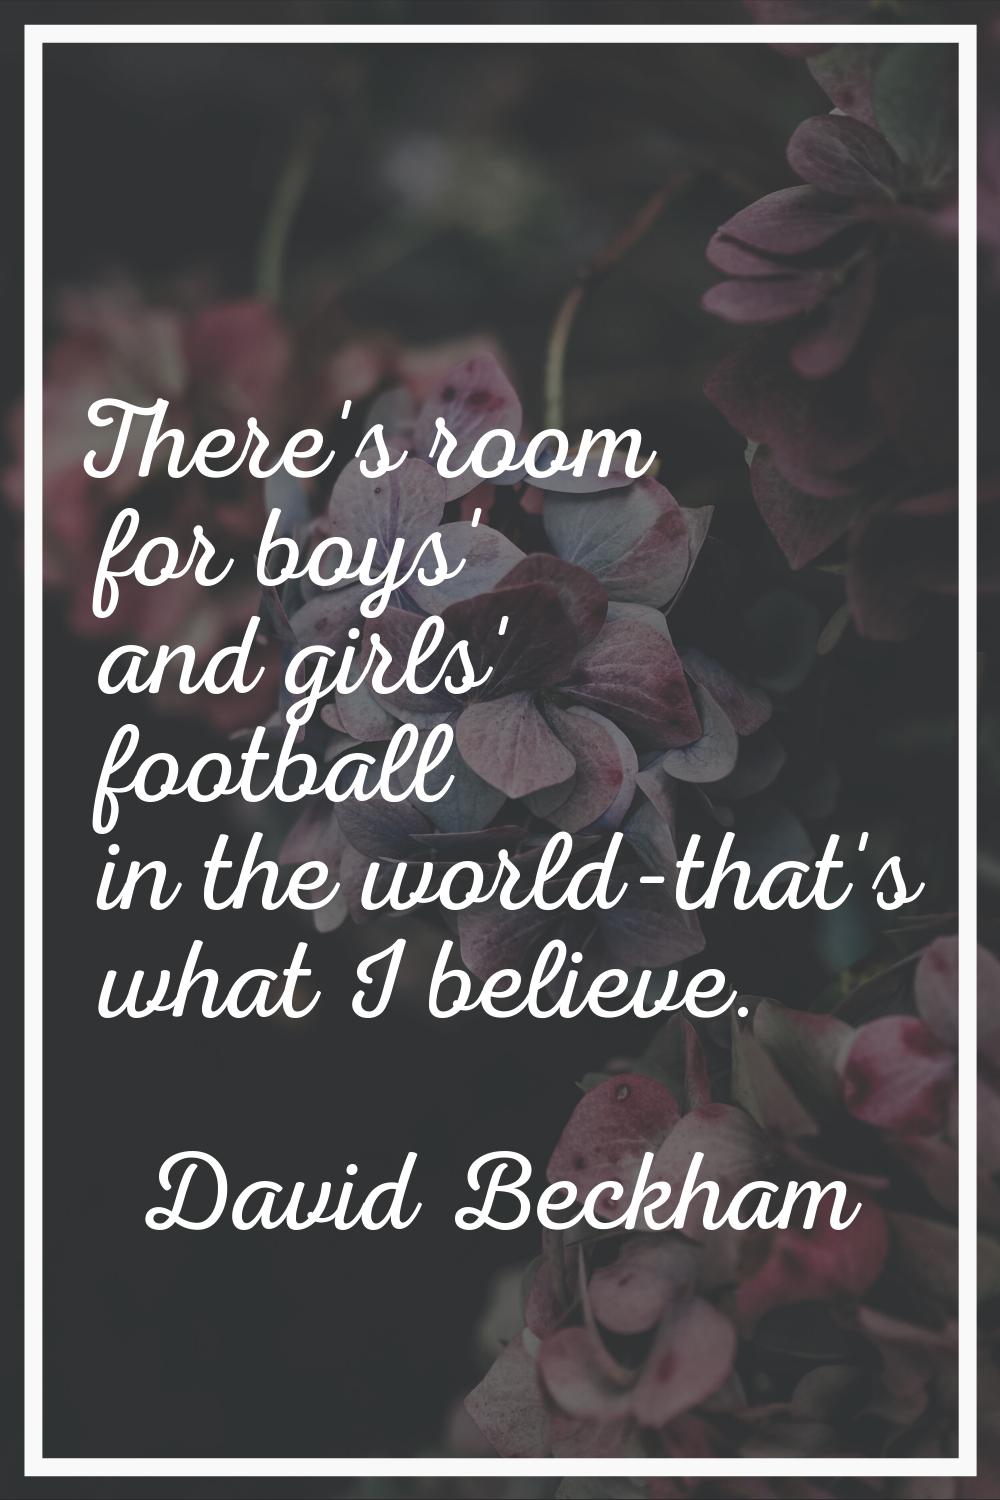 There's room for boys' and girls' football in the world-that's what I believe.